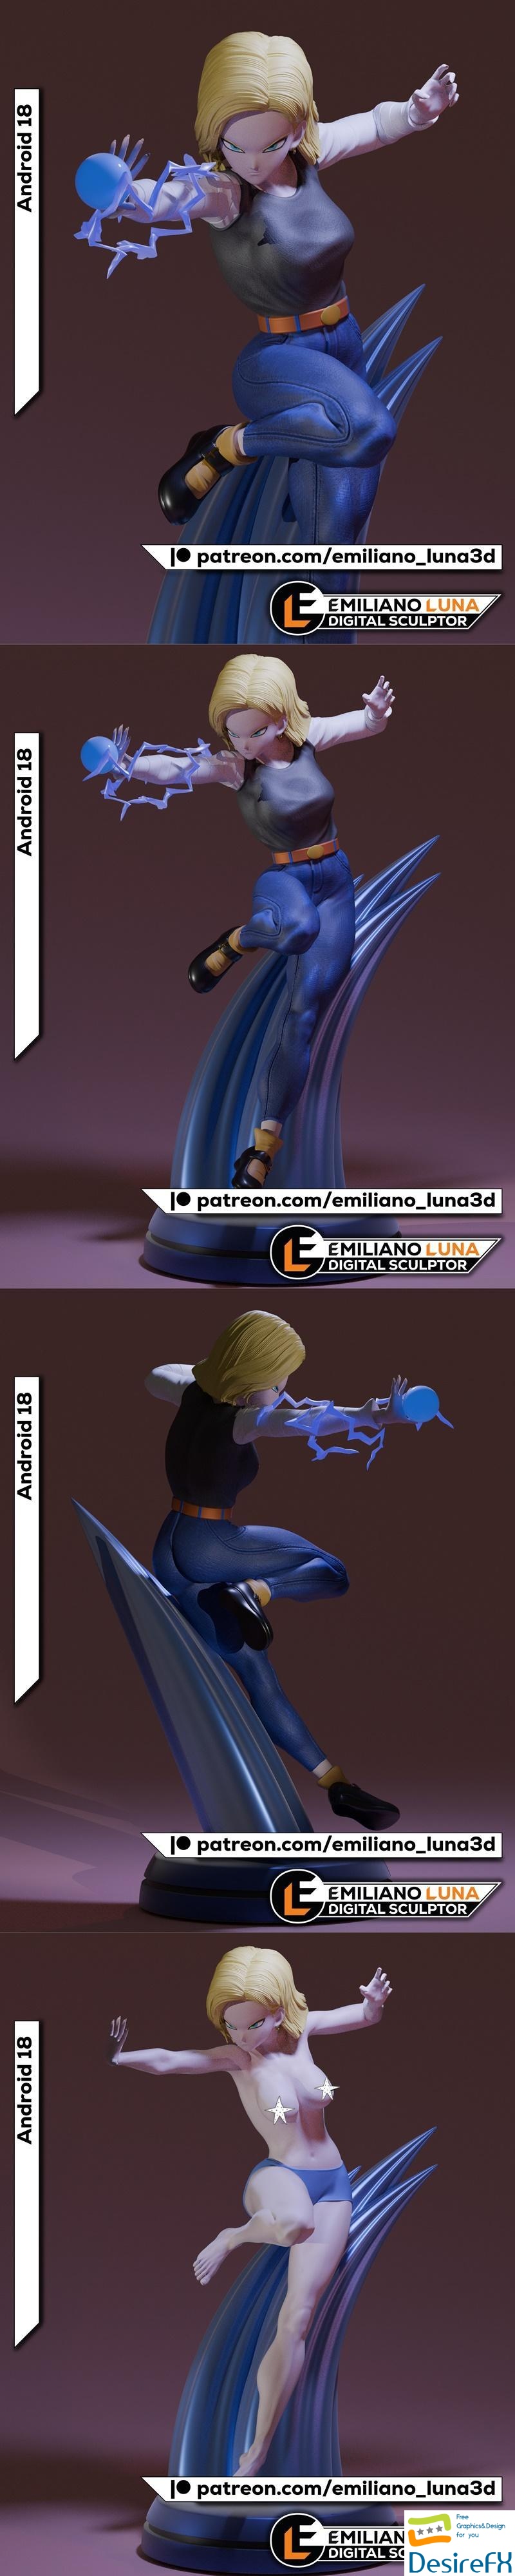 Android 18 by Emiliano Luna3d 3D Print